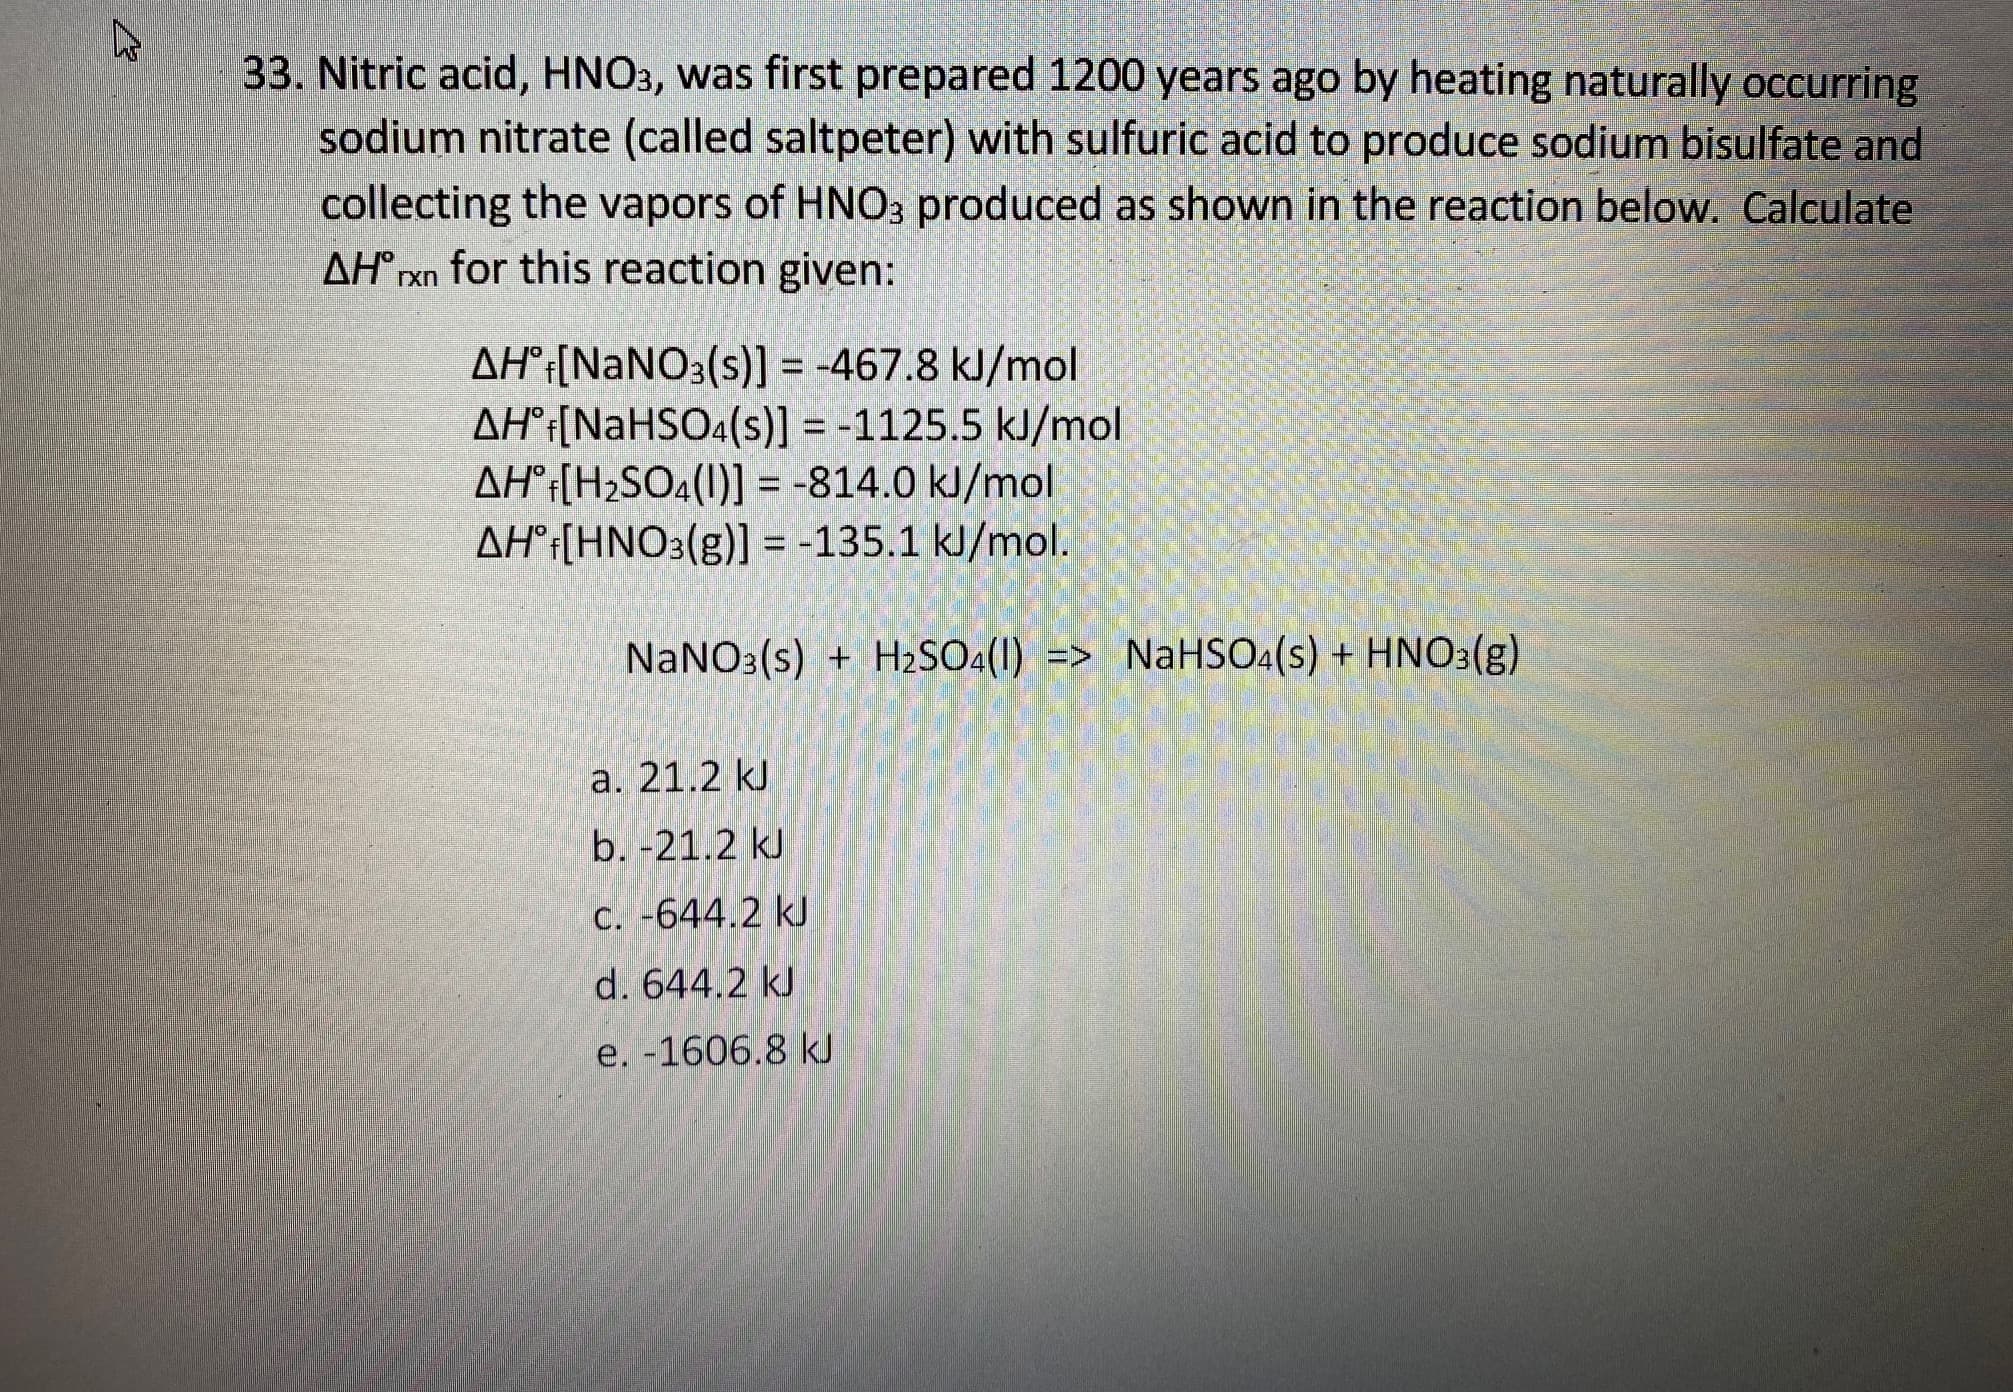 33. Nitric acid, HNO3, was first prepared 1200 years ago by heating naturally occurring
sodium nitrate (called saltpeter) with sulfuric acid to produce sodium bisulfate and
collecting the vapors of HNO3 produced as shown in the reaction below. Calculate
AH® rxn for this reaction given:
AH°¡[NaNO3(s)] = -467.8 kJ/mol
AH°¡[NaHSO4(s)] = -1125.5 kJ/mol
AH°¡[H2SO4(1)] = -814.0 kJ/mol
AH°¡[HNO3(g)] = -135.1 kJ/mol.
%3D
%3D
NaNO3(s) + H2SO4(1) => NaHSO4(s) + HNO3(g)
a. 21.2 kJ
b. -21.2 kJ
C. -644.2 kJ
d. 644.2 kJ
e. -1606.8 kJ
